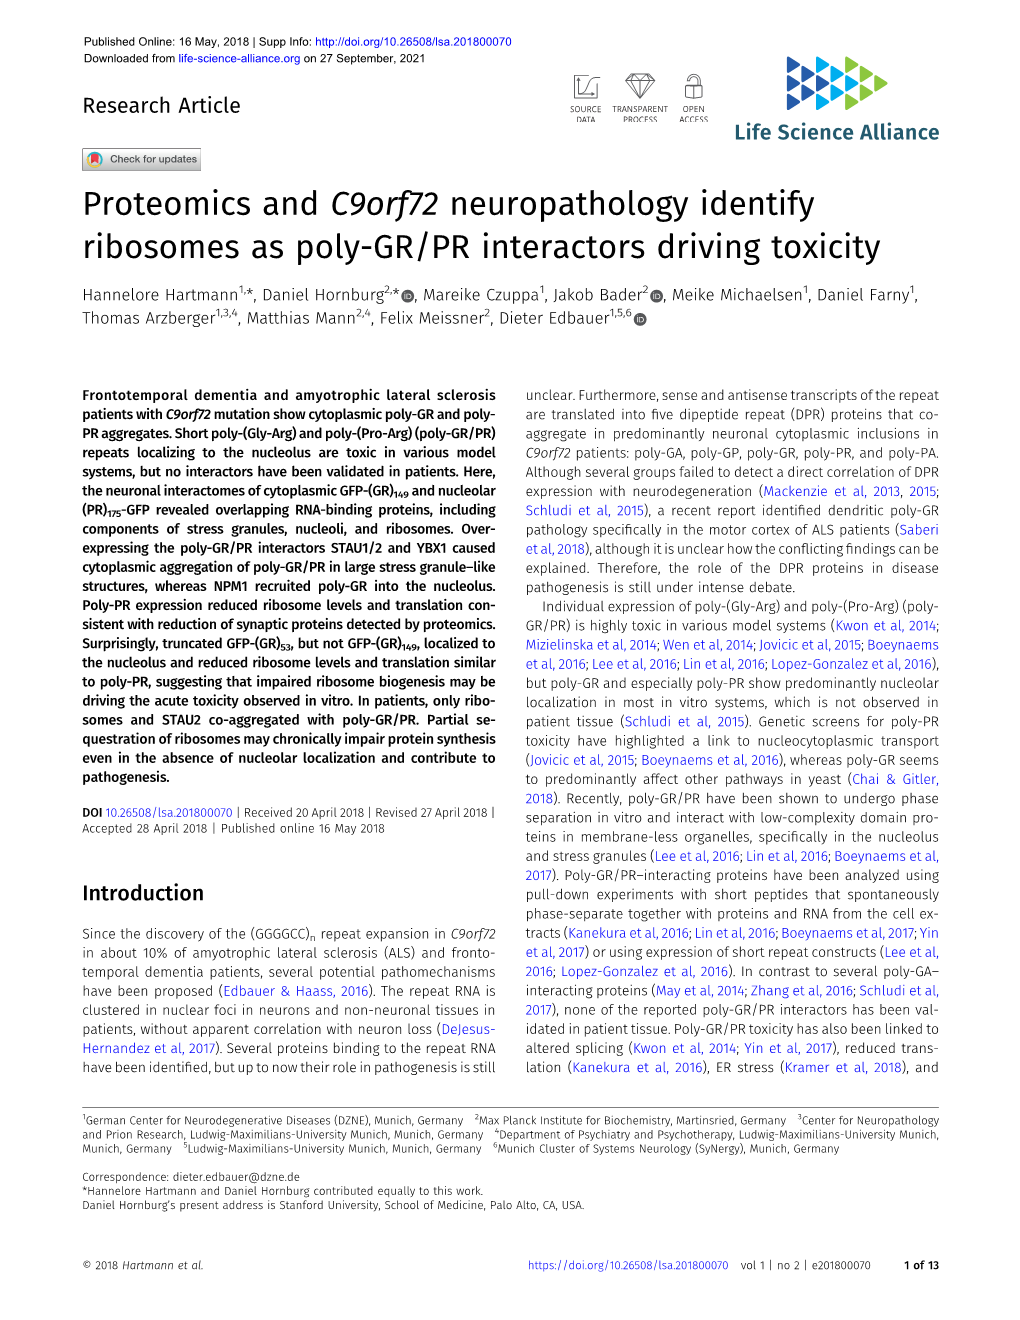 Proteomics and C9orf72 Neuropathology Identify Ribosomes As Poly-GR/PR Interactors Driving Toxicity